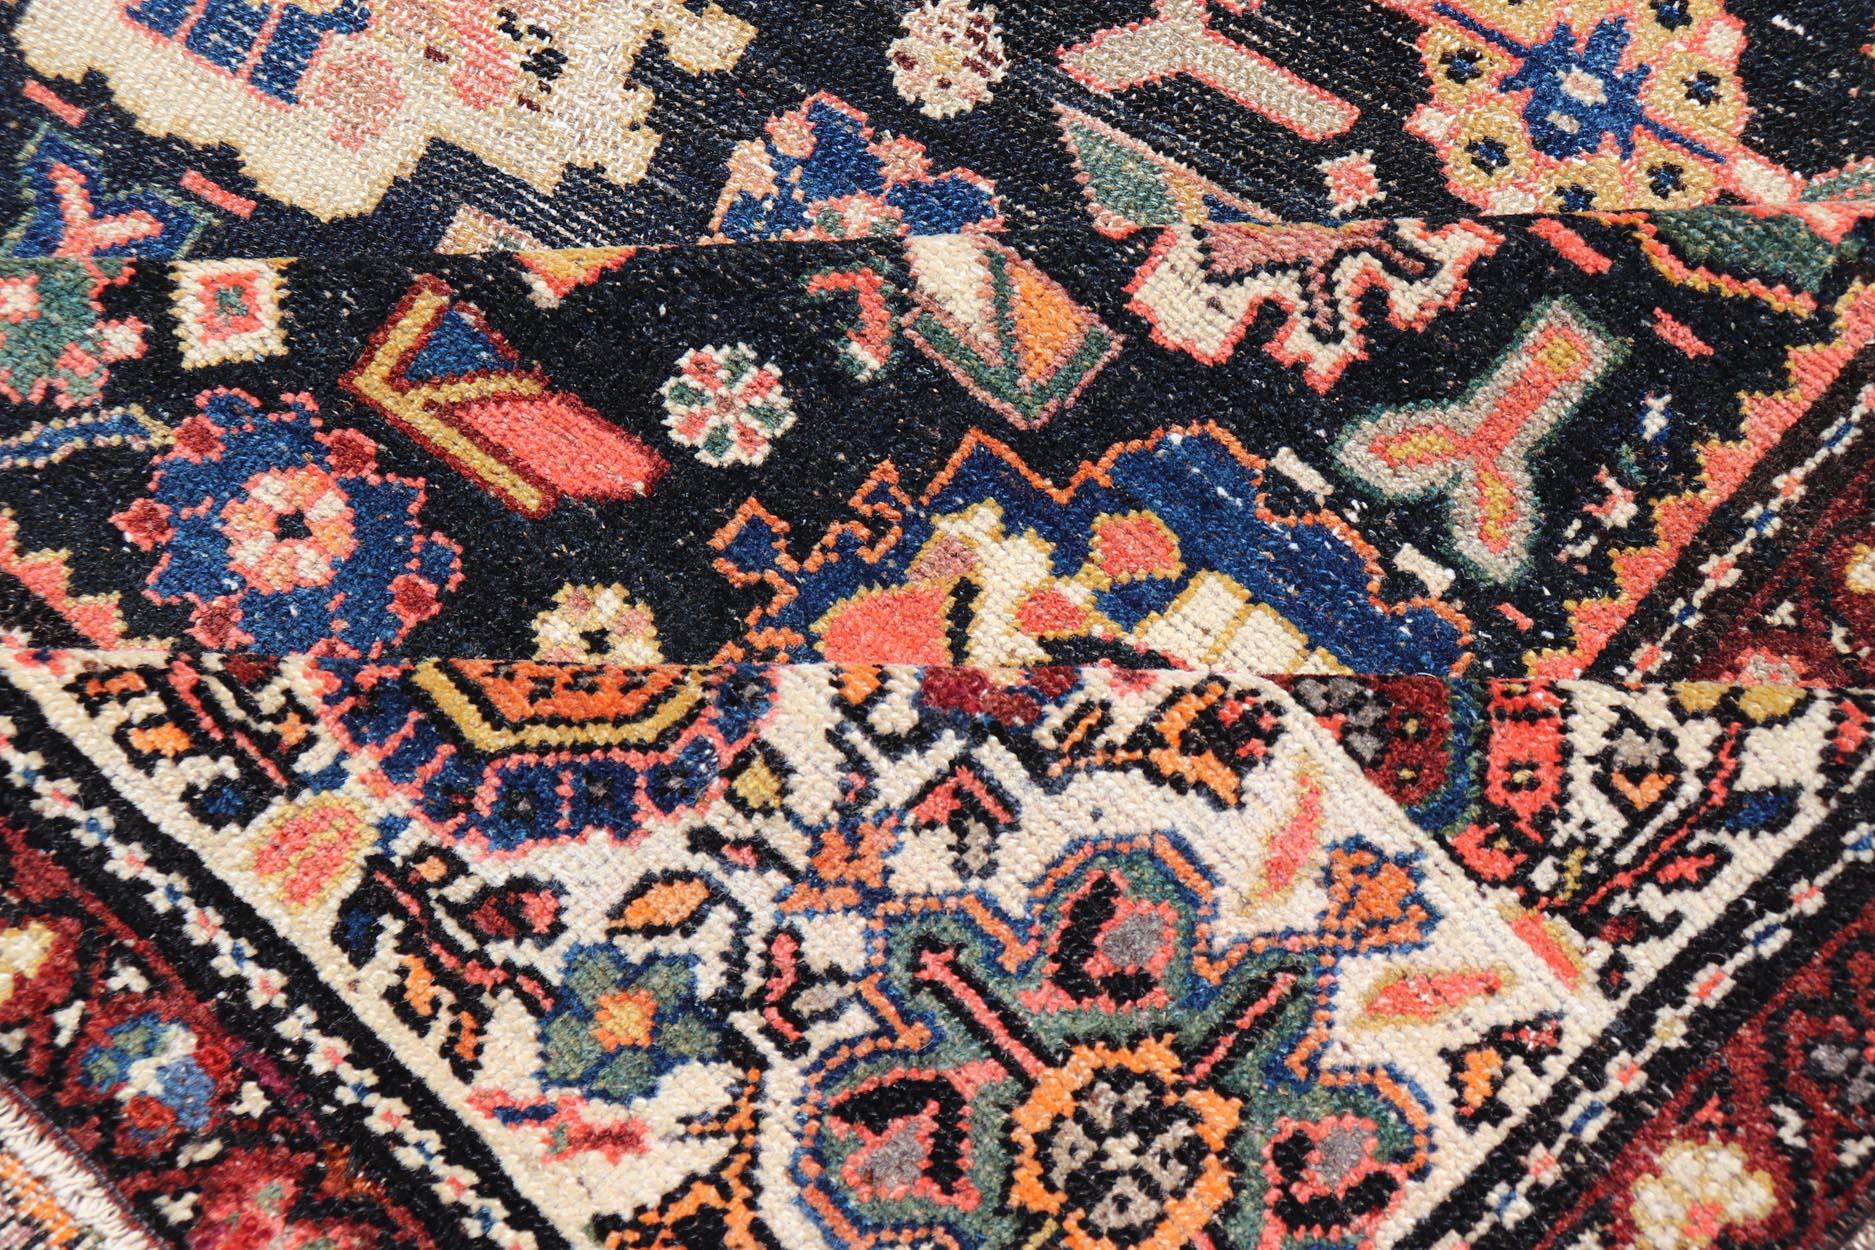 Antique N.W. Persian Large Gallery Rug in Navy Blue Background & All over Design For Sale 4